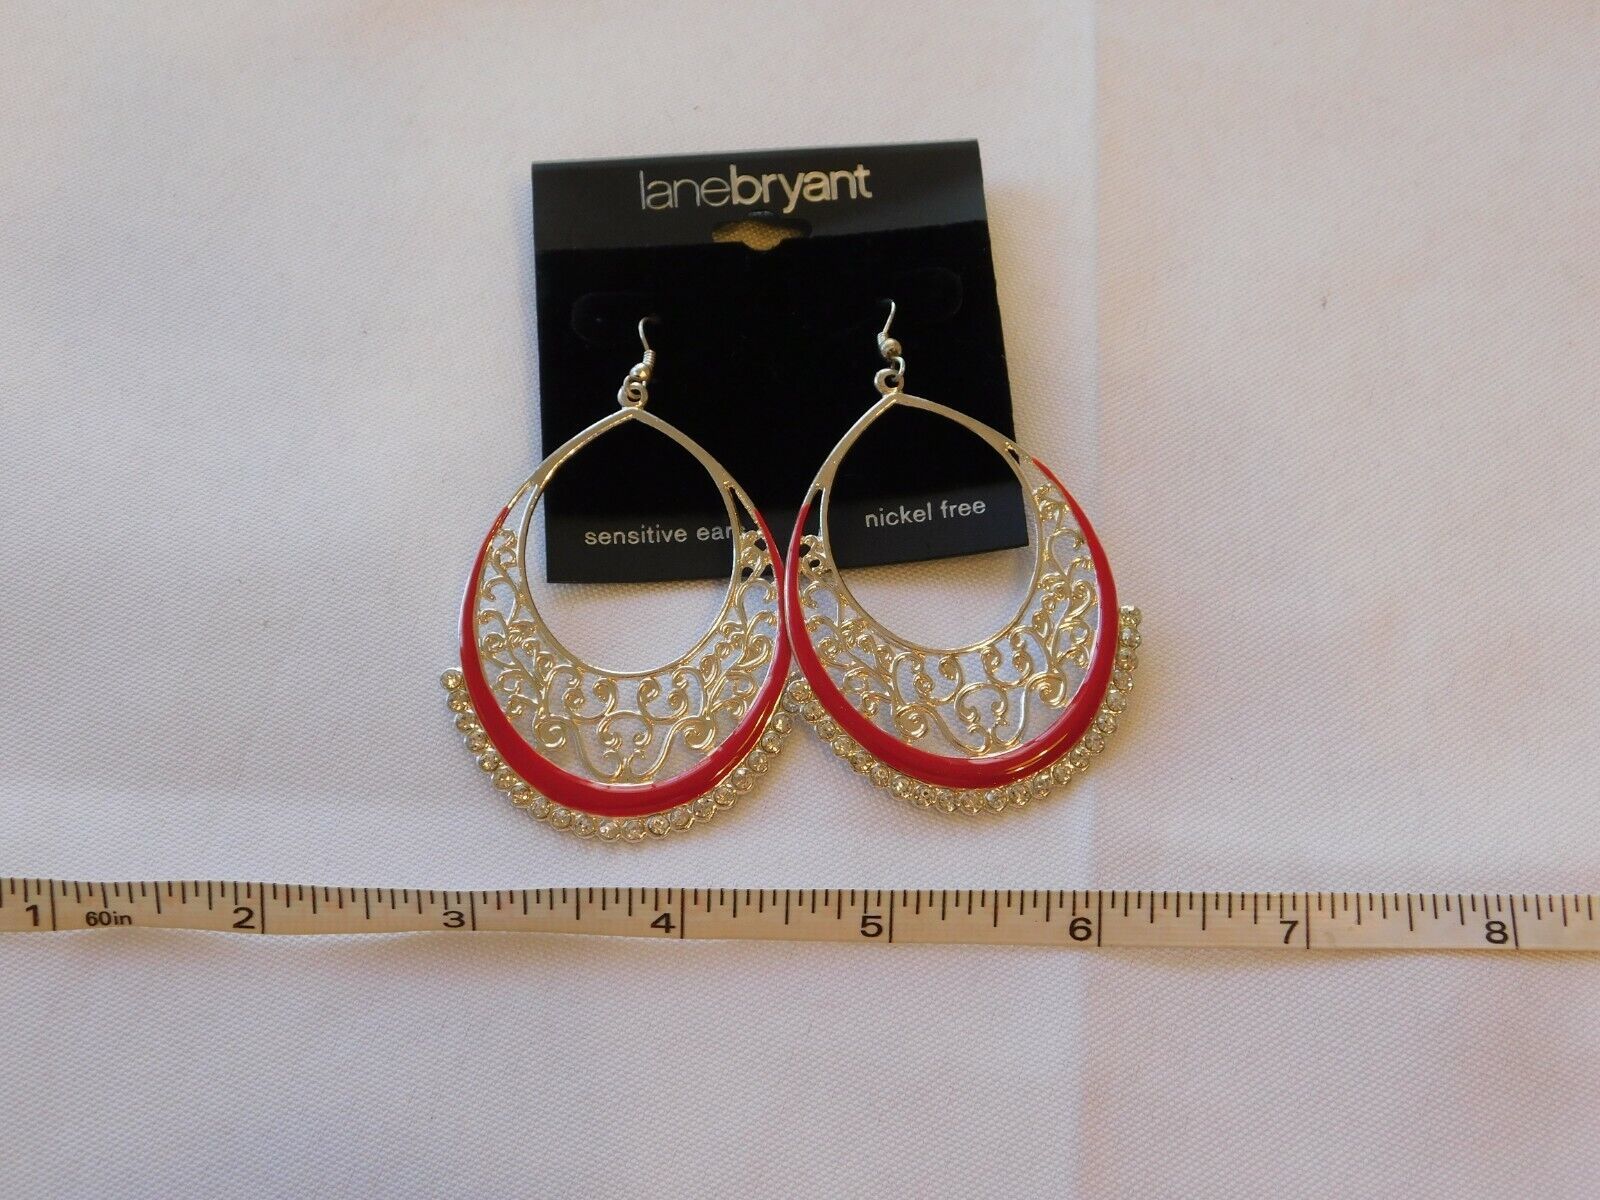 Primary image for Lane Bryant Ladies Women's 1 pair Earrings Silver Tone 95506218 Onesz NEW NOS